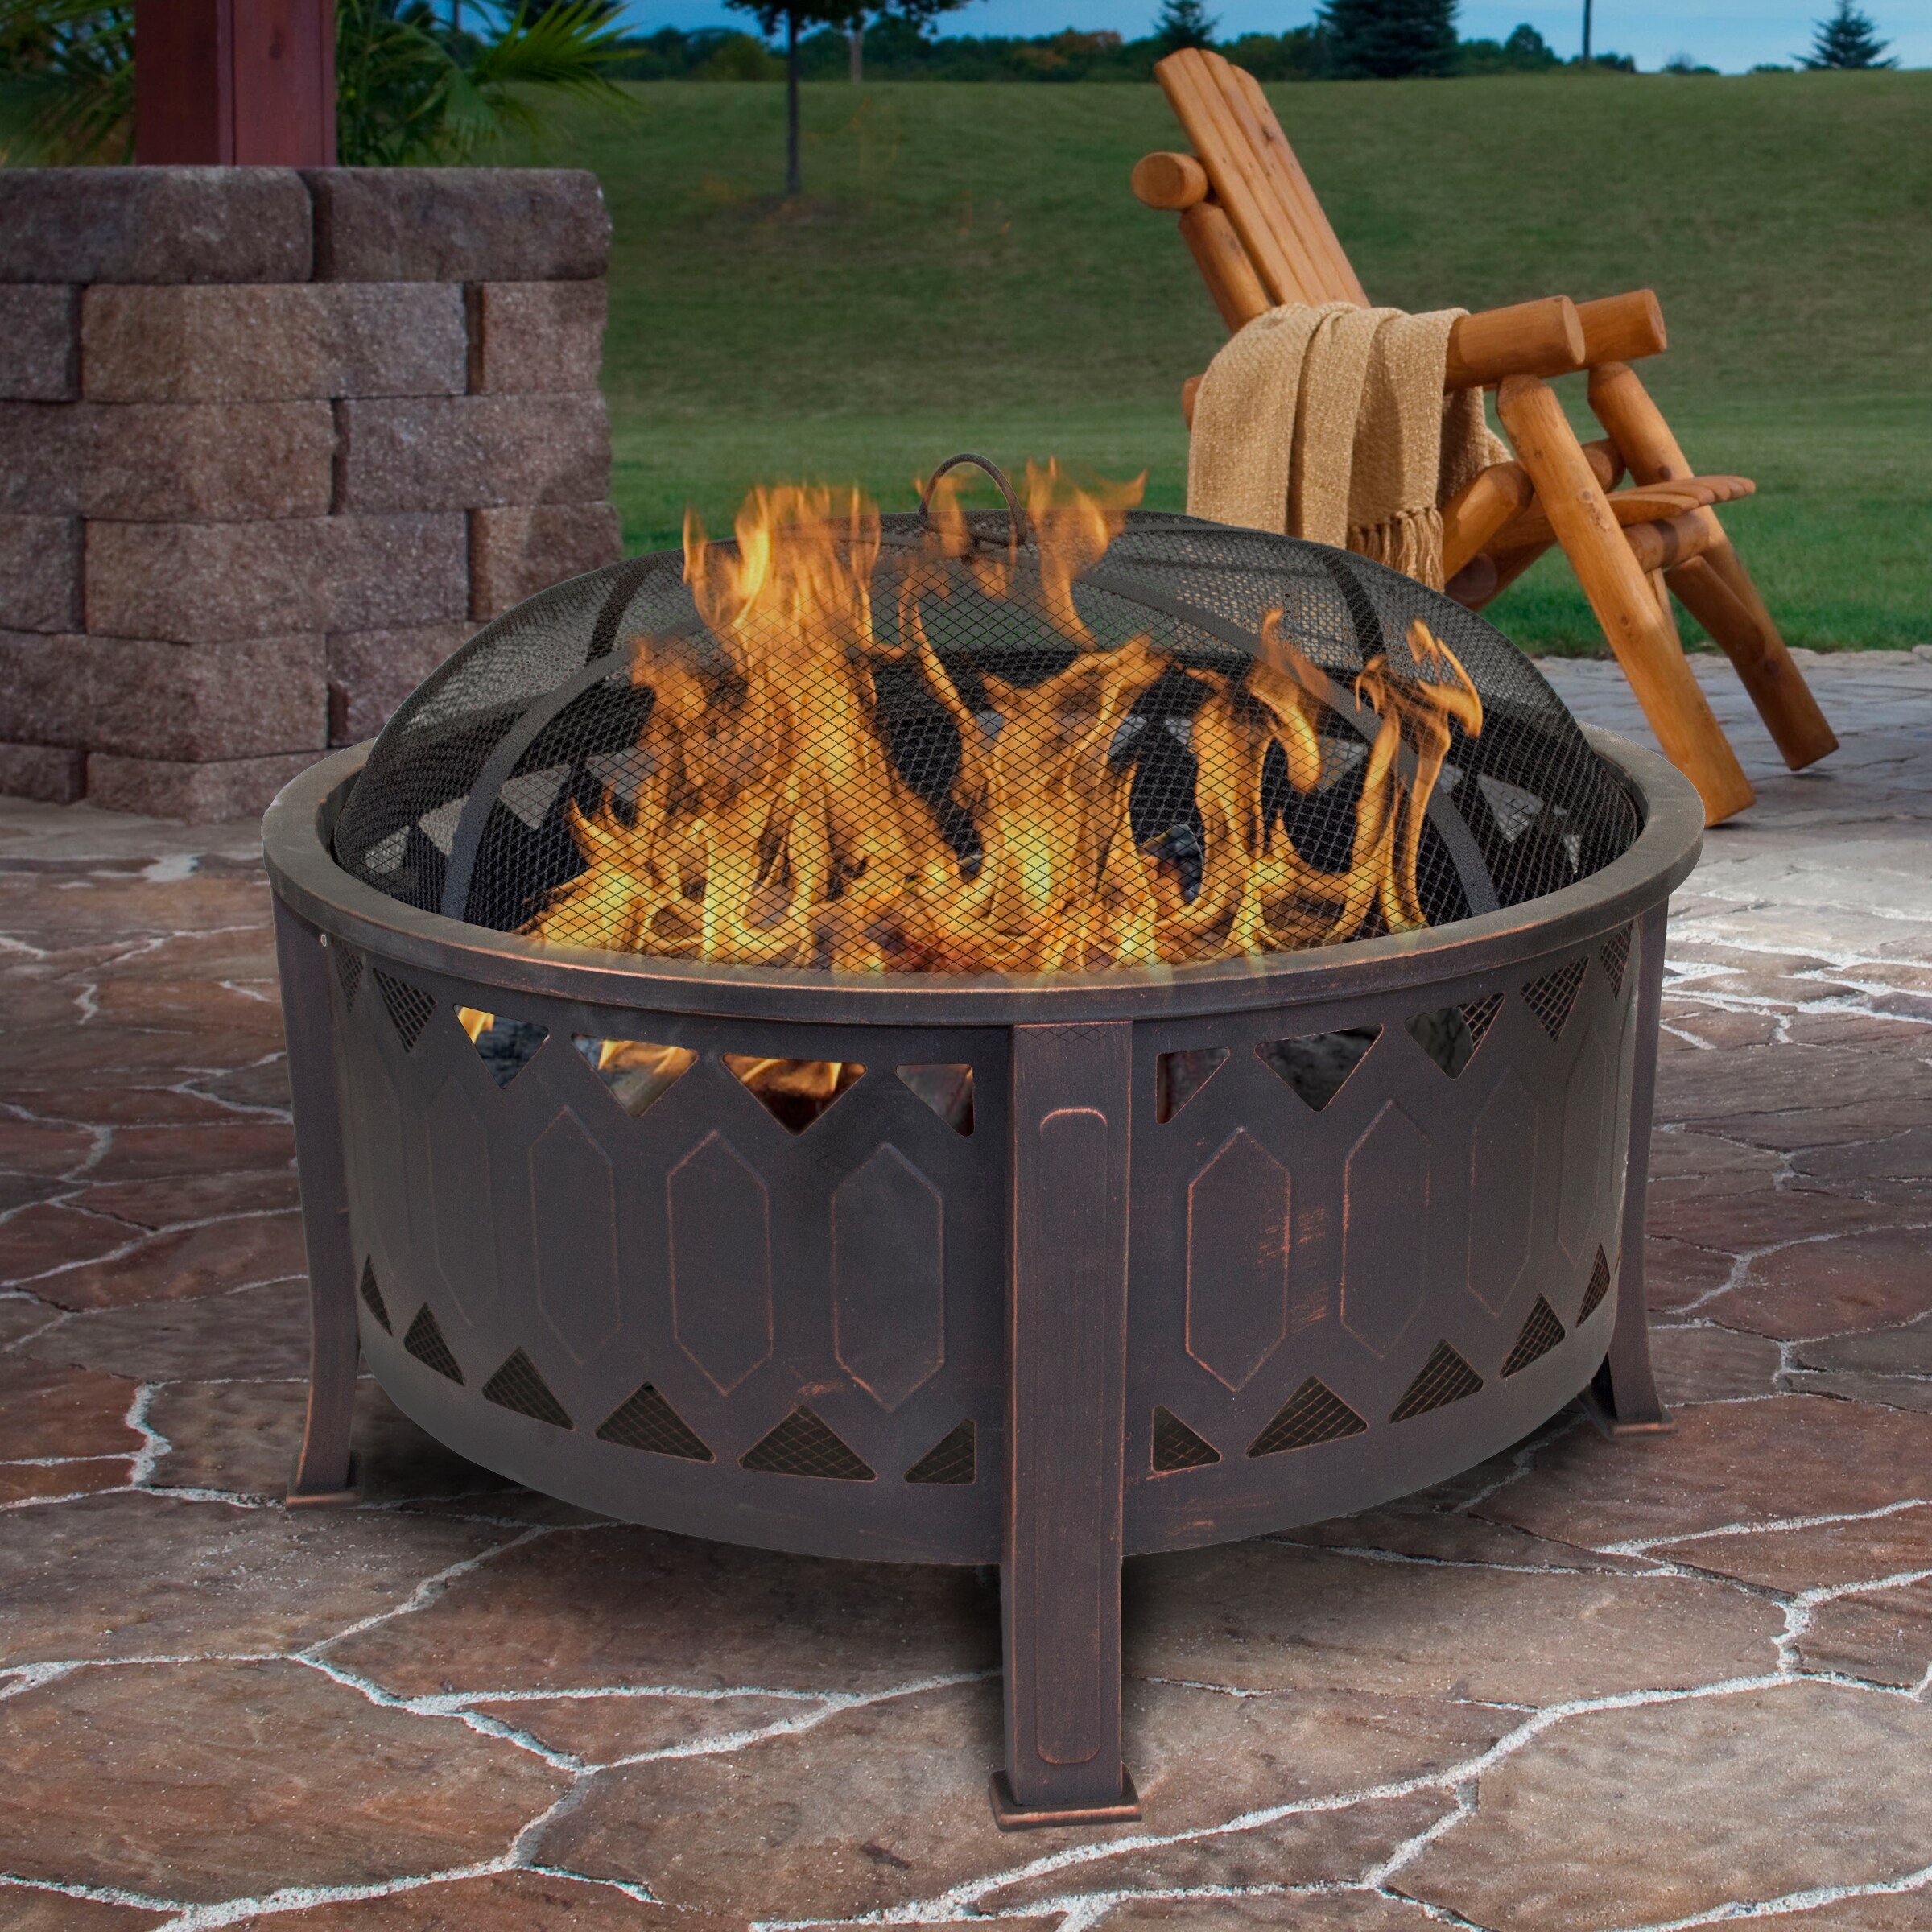 Fire Pit Extra Large in Cast Iron Garden Patio Heater Camping Bowl for Wood 86cm 